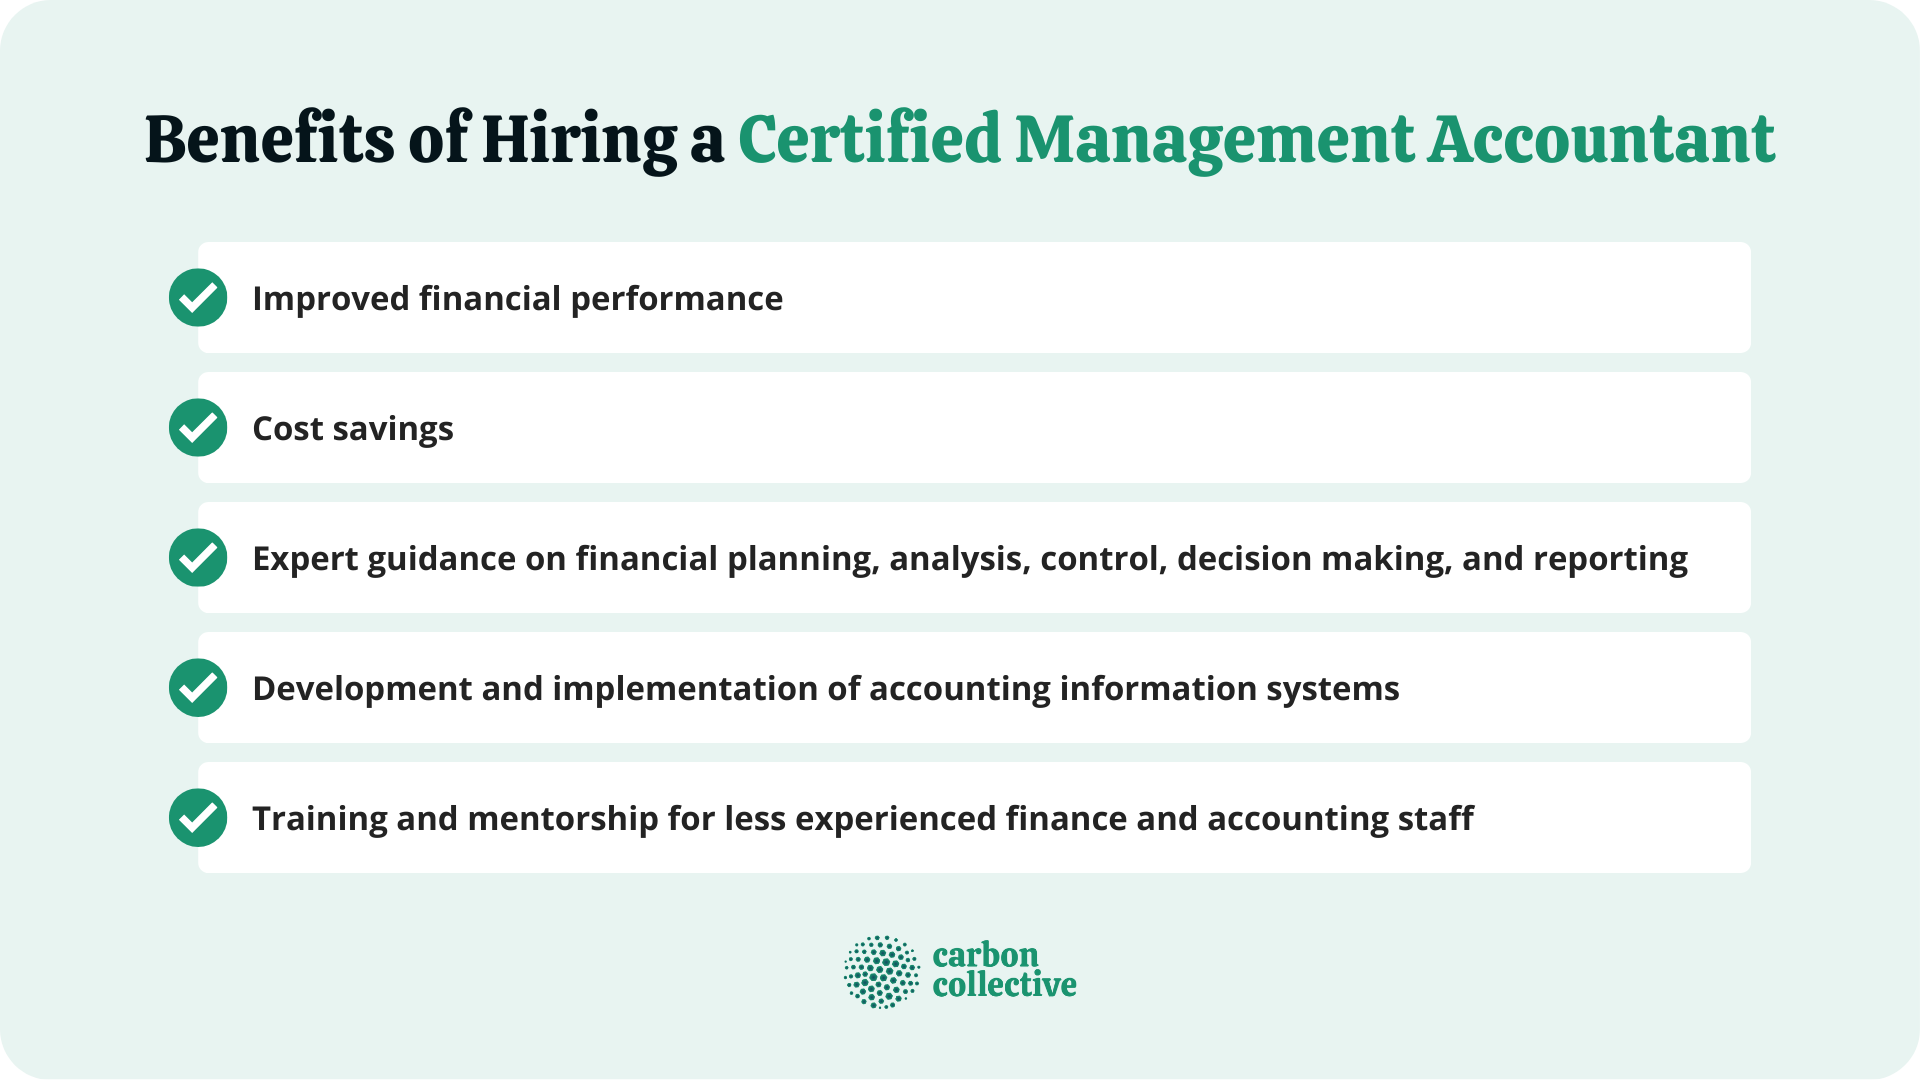 Benefits_of_Hiring_a_Certified_Management_Accountant